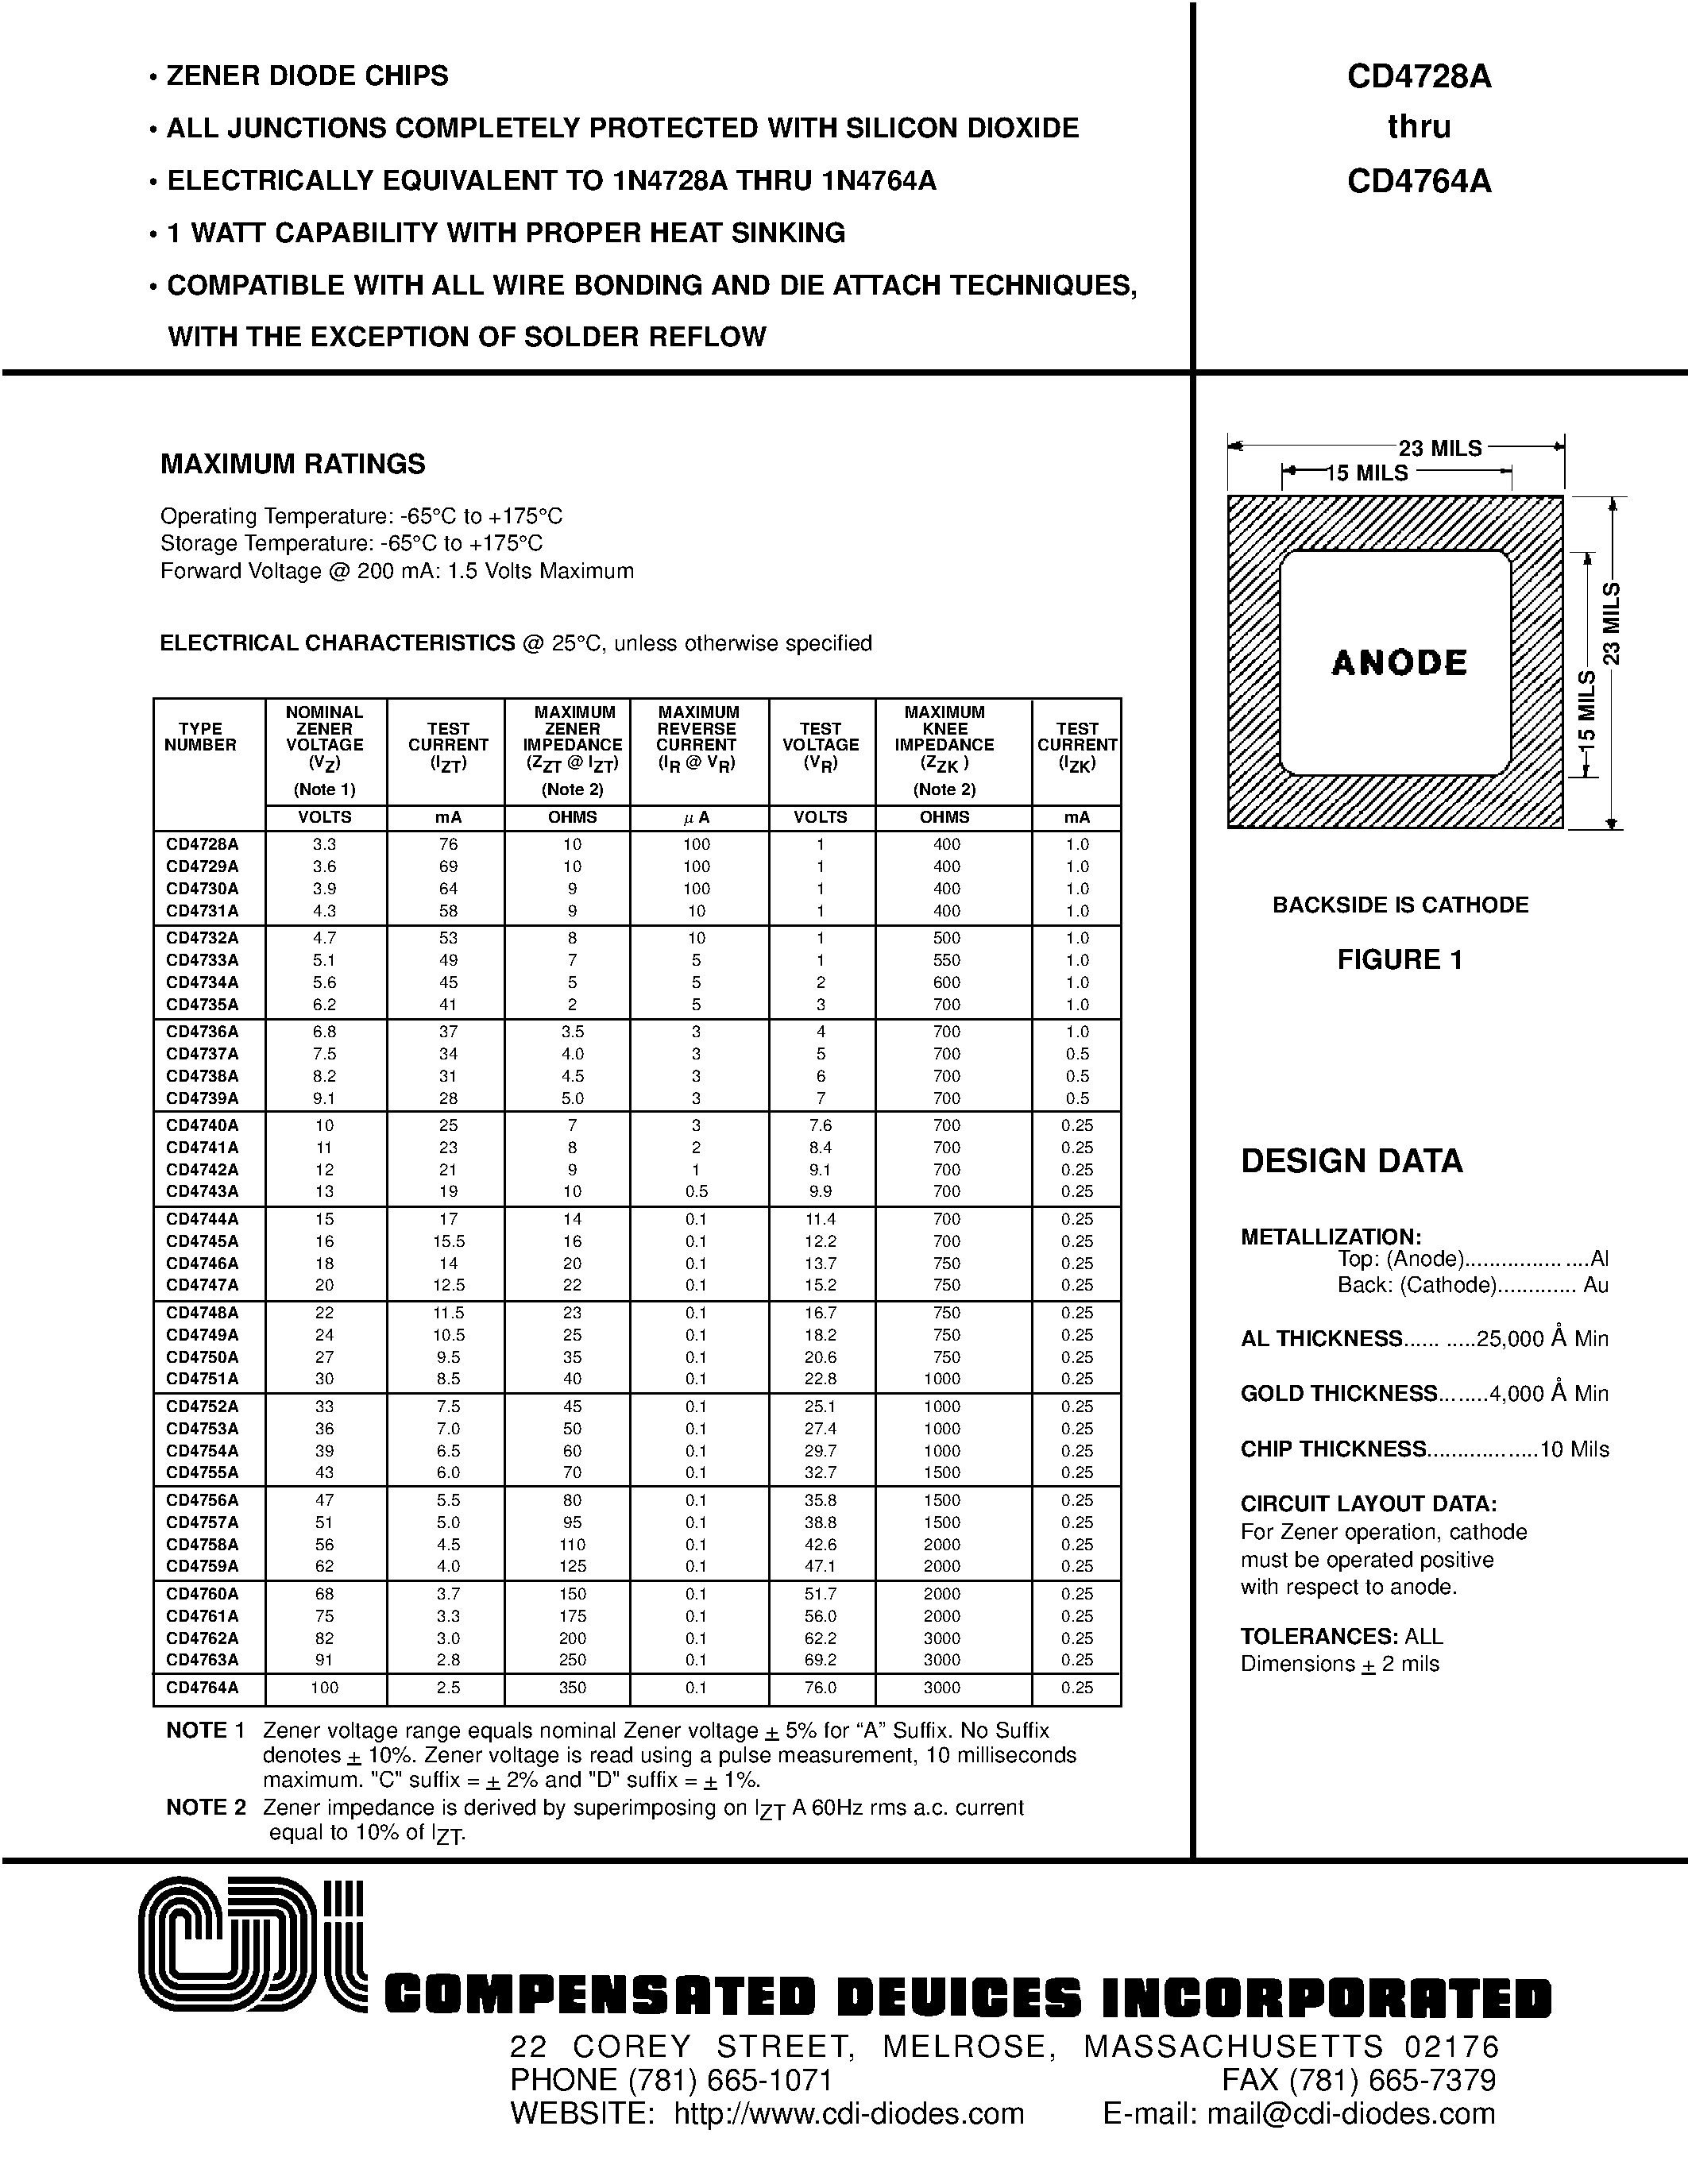 Datasheet CD4746A - ZENER DIODE CHIPS page 1